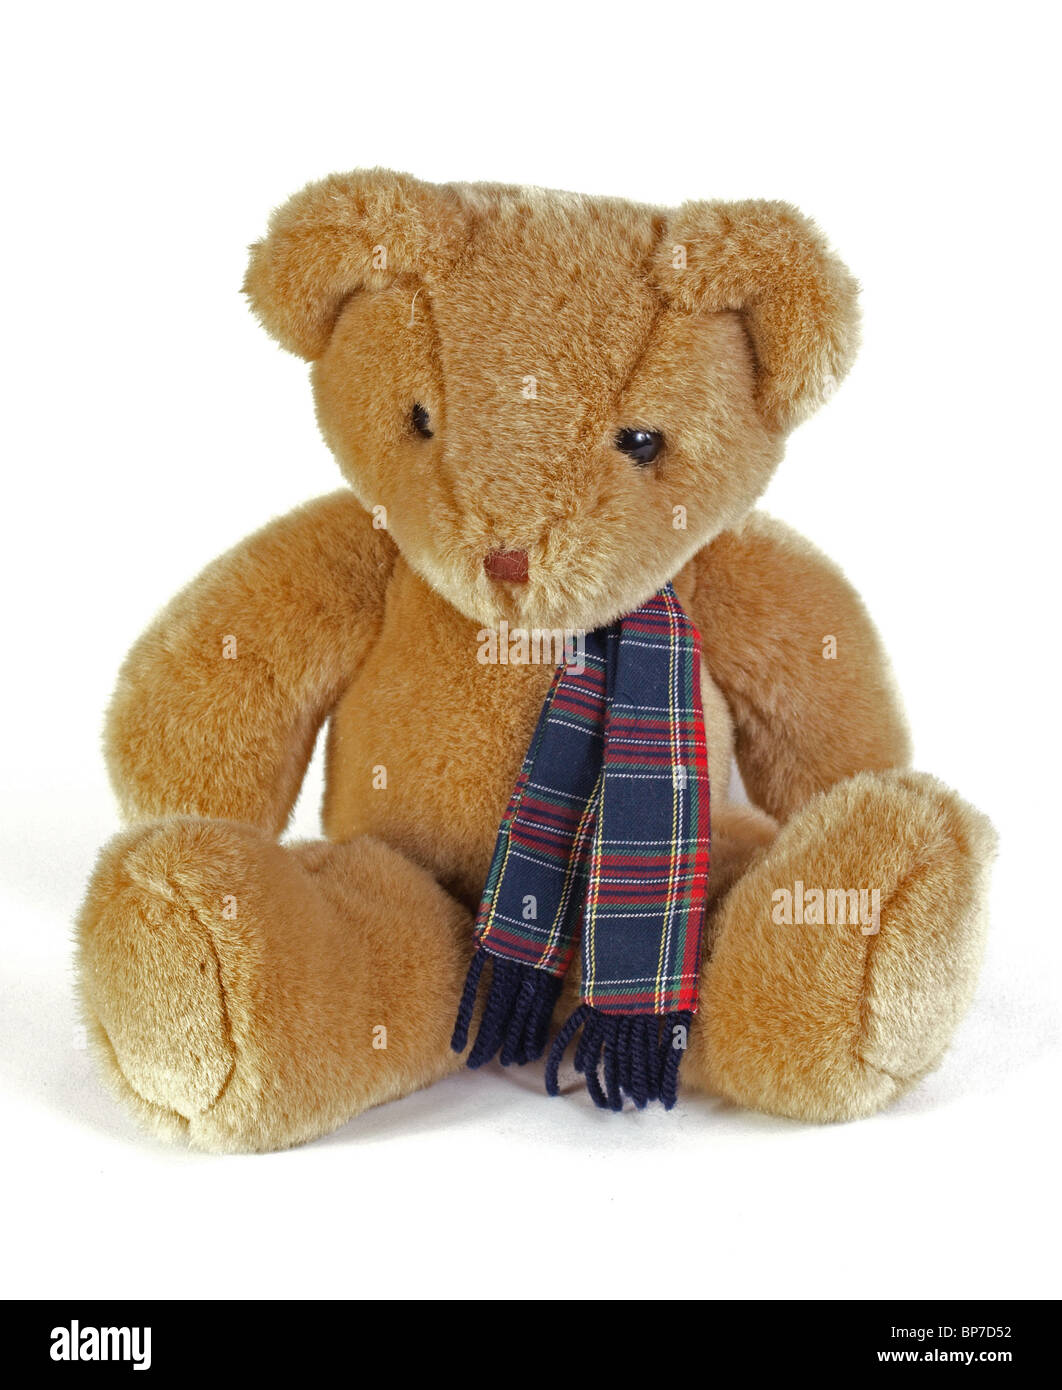 Teddy Bear with a tartan scarf on a white background. Stock Photo